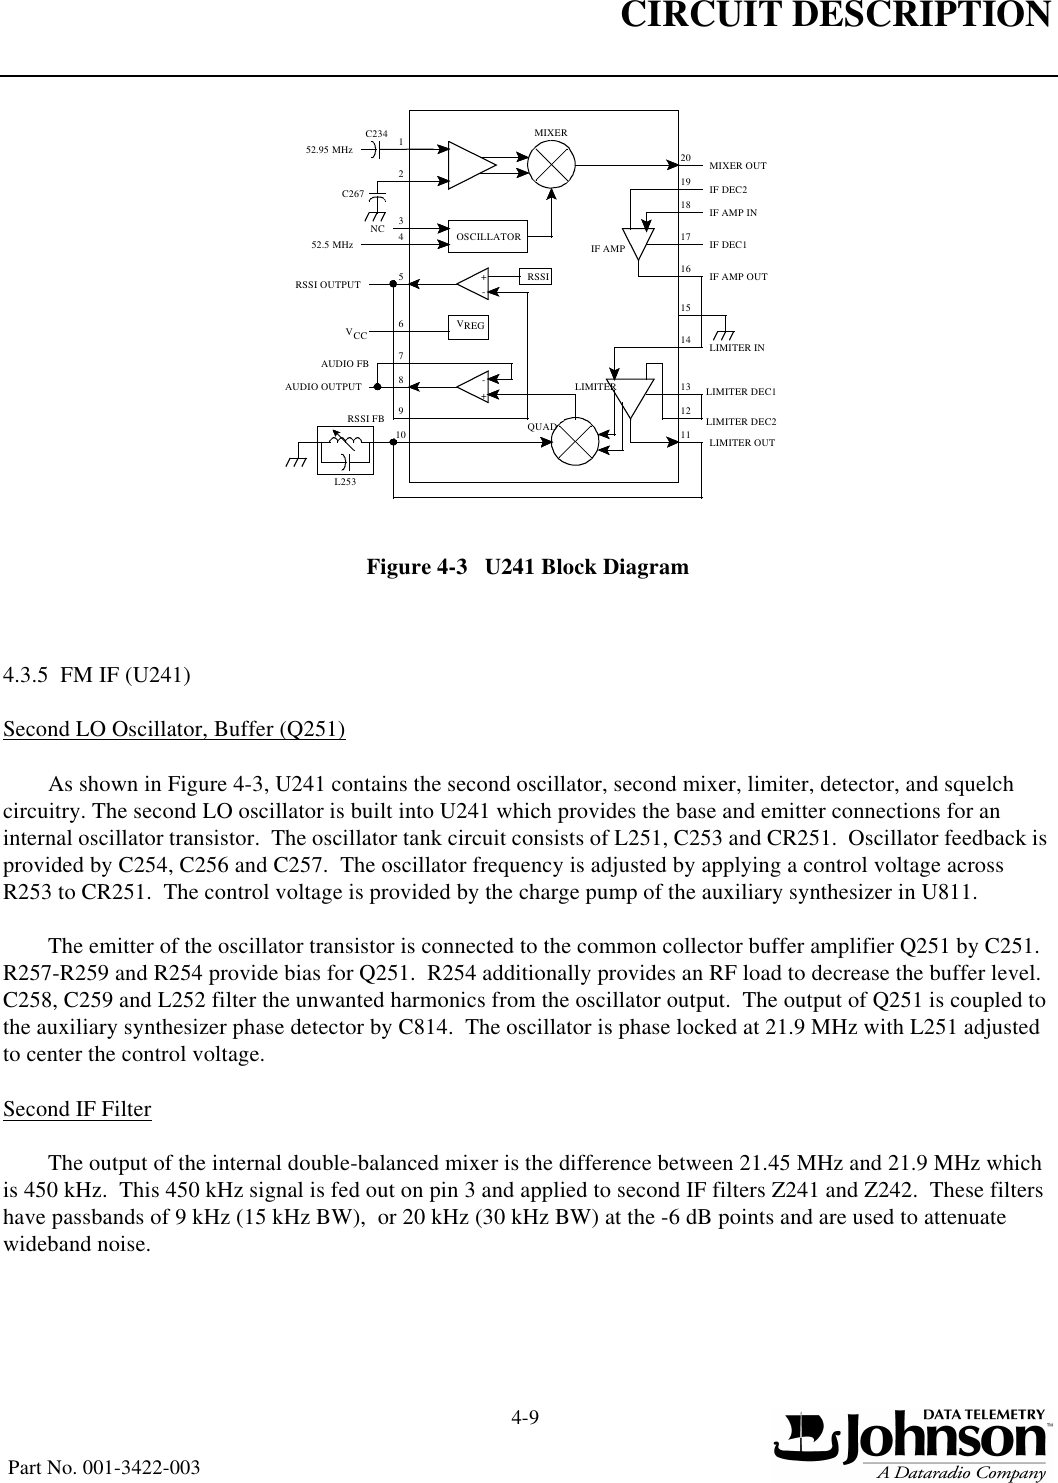 CIRCUIT DESCRIPTION4-9  Part No. 001-3422-003Figure 4-3   U241 Block Diagram4.3.5  FM IF (U241)Second LO Oscillator, Buffer (Q251)As shown in Figure 4-3, U241 contains the second oscillator, second mixer, limiter, detector, and squelch circuitry. The second LO oscillator is built into U241 which provides the base and emitter connections for an internal oscillator transistor.  The oscillator tank circuit consists of L251, C253 and CR251.  Oscillator feedback is provided by C254, C256 and C257.  The oscillator frequency is adjusted by applying a control voltage across R253 to CR251.  The control voltage is provided by the charge pump of the auxiliary synthesizer in U811.  The emitter of the oscillator transistor is connected to the common collector buffer amplifier Q251 by C251.  R257-R259 and R254 provide bias for Q251.  R254 additionally provides an RF load to decrease the buffer level.  C258, C259 and L252 filter the unwanted harmonics from the oscillator output.  The output of Q251 is coupled to the auxiliary synthesizer phase detector by C814.  The oscillator is phase locked at 21.9 MHz with L251 adjusted to center the control voltage.Second IF FilterThe output of the internal double-balanced mixer is the difference between 21.45 MHz and 21.9 MHz which is 450 kHz.  This 450 kHz signal is fed out on pin 3 and applied to second IF filters Z241 and Z242.  These filters have passbands of 9 kHz (15 kHz BW),  or 20 kHz (30 kHz BW) at the -6 dB points and are used to attenuate wideband noise.124MIXER5151411RSSI52.95 MHzC234C26720OSCILLATOR52.5 MHz+-RSSI OUTPUT9VREG6VCC78+-10 QUADAUDIO OUTPUTL25312133NCLIMITER INLIMITERIF AMP OUTIF DEC1IF DEC2IF AMP INMIXER OUTLIMITER DEC1LIMITER DEC2LIMITER OUTIF AMP16171819RSSI FBAUDIO FB